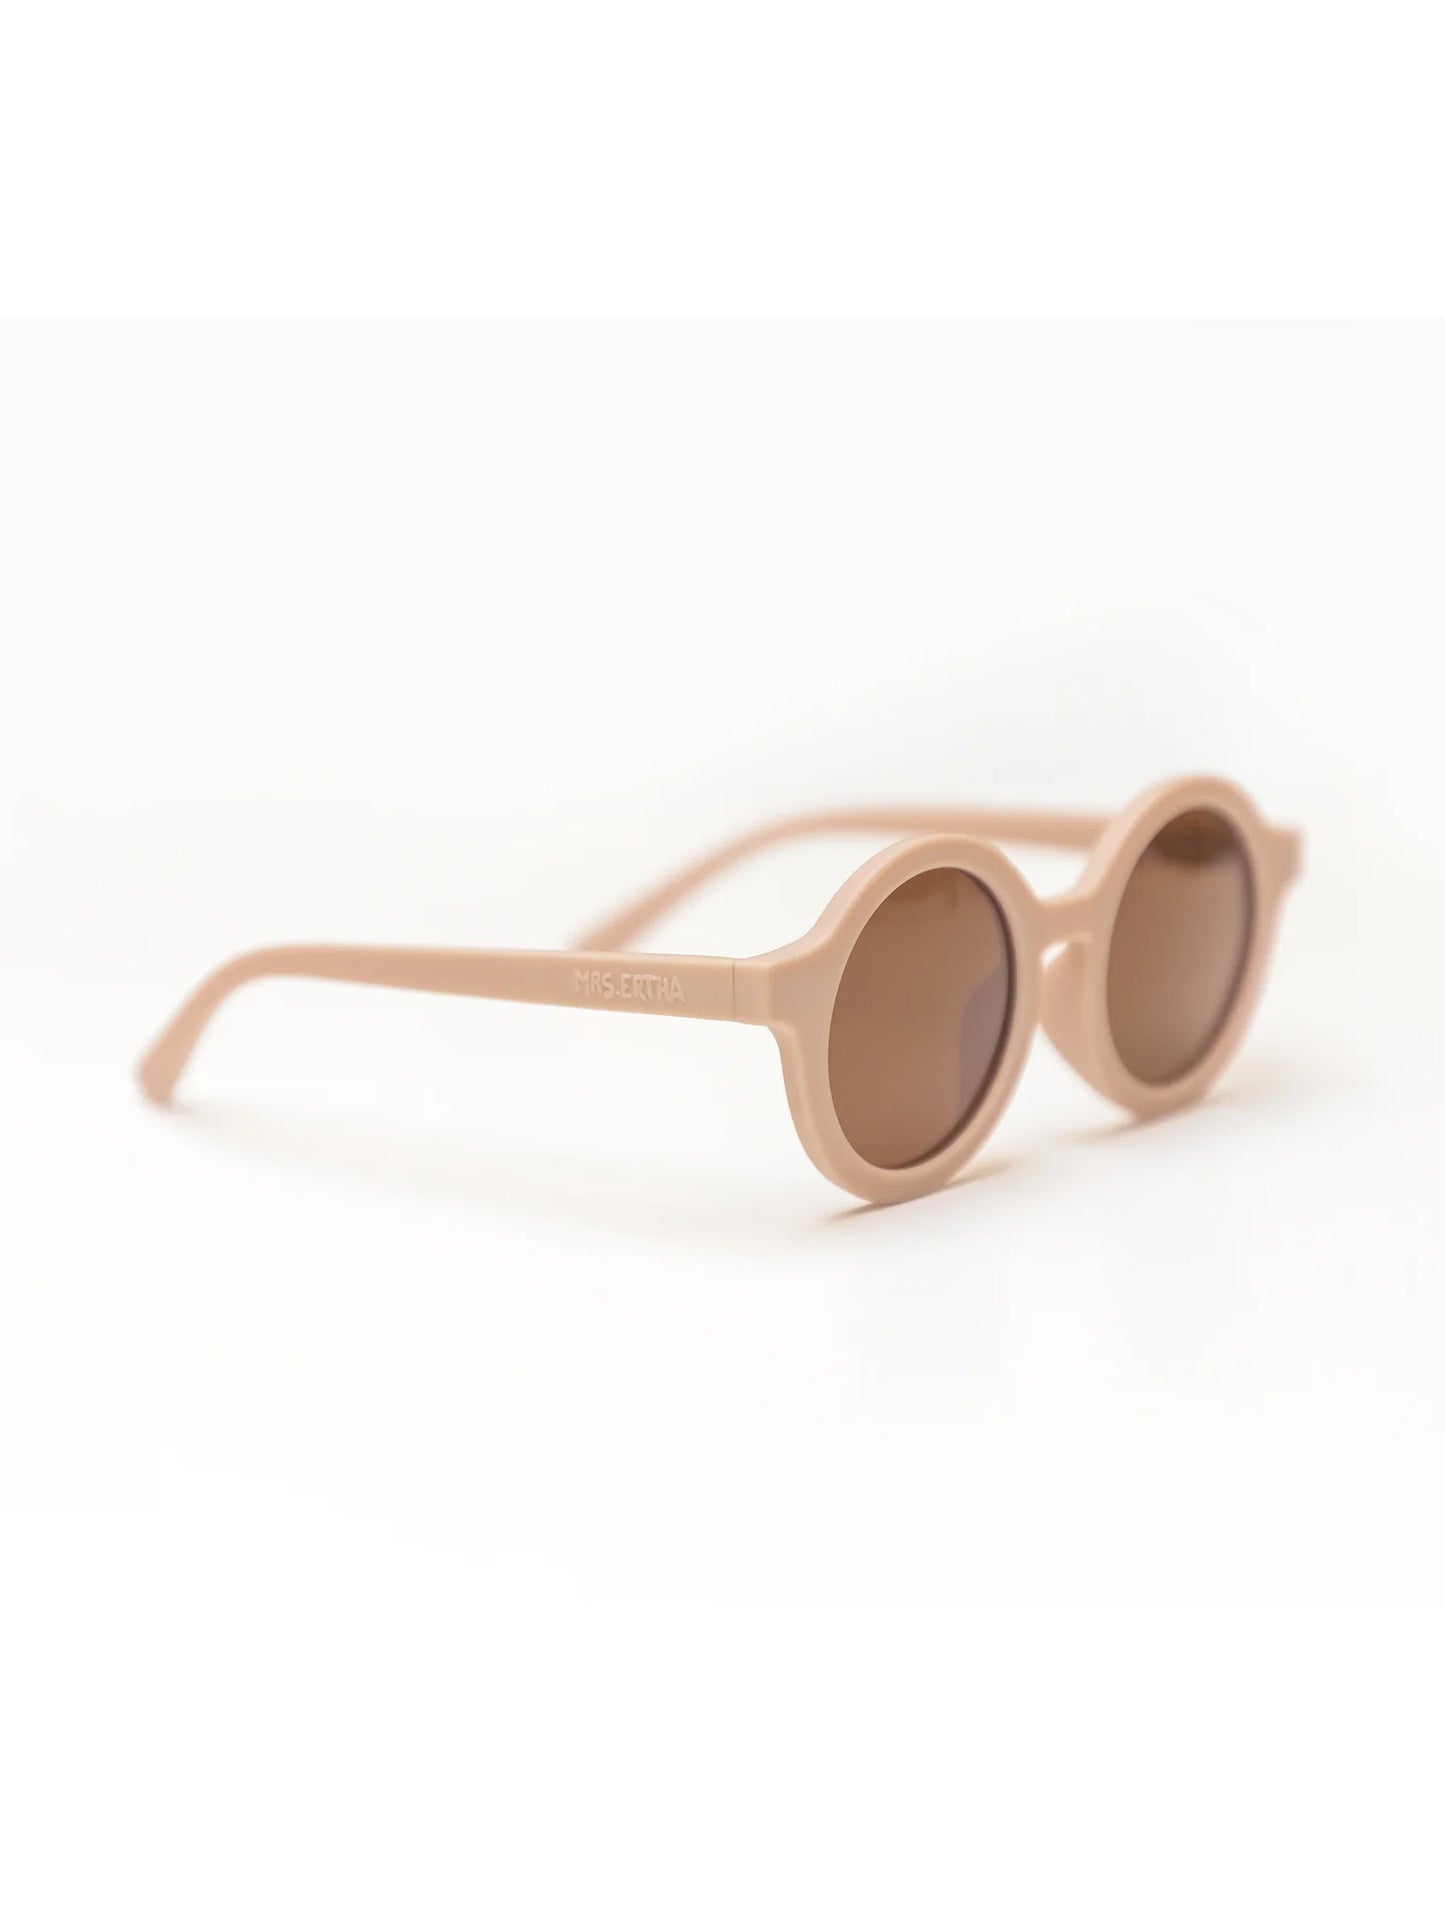 Soft Coral Recycled Plastic Kids Sunglasses